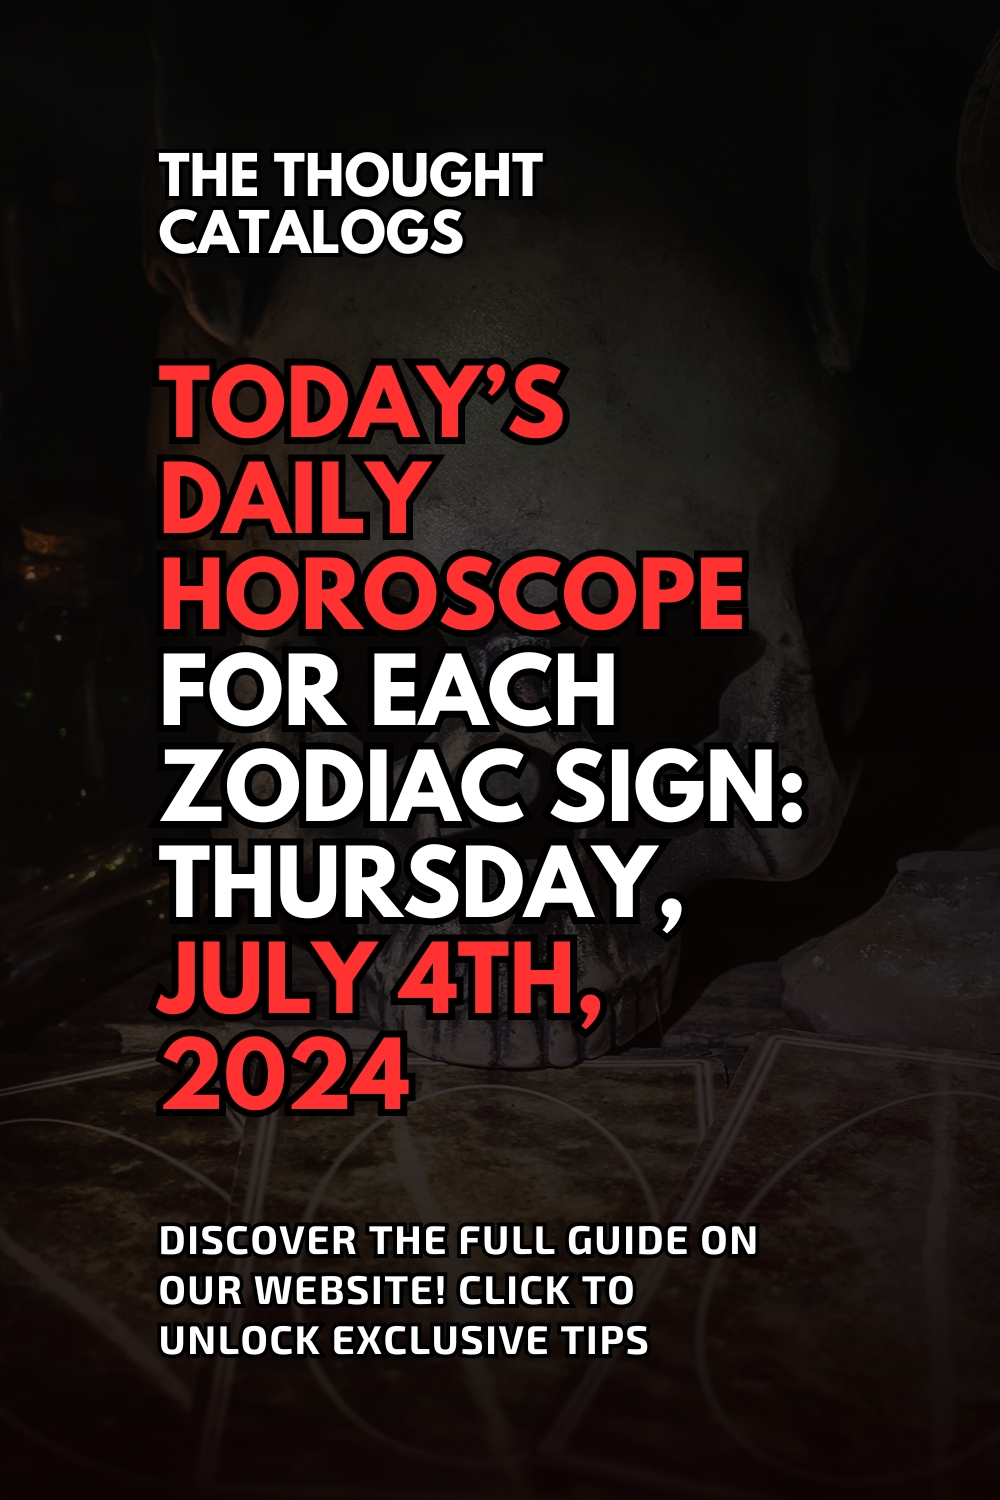 Today’s Daily Horoscope For Each Zodiac Sign: Thursday, July 4th, 2024